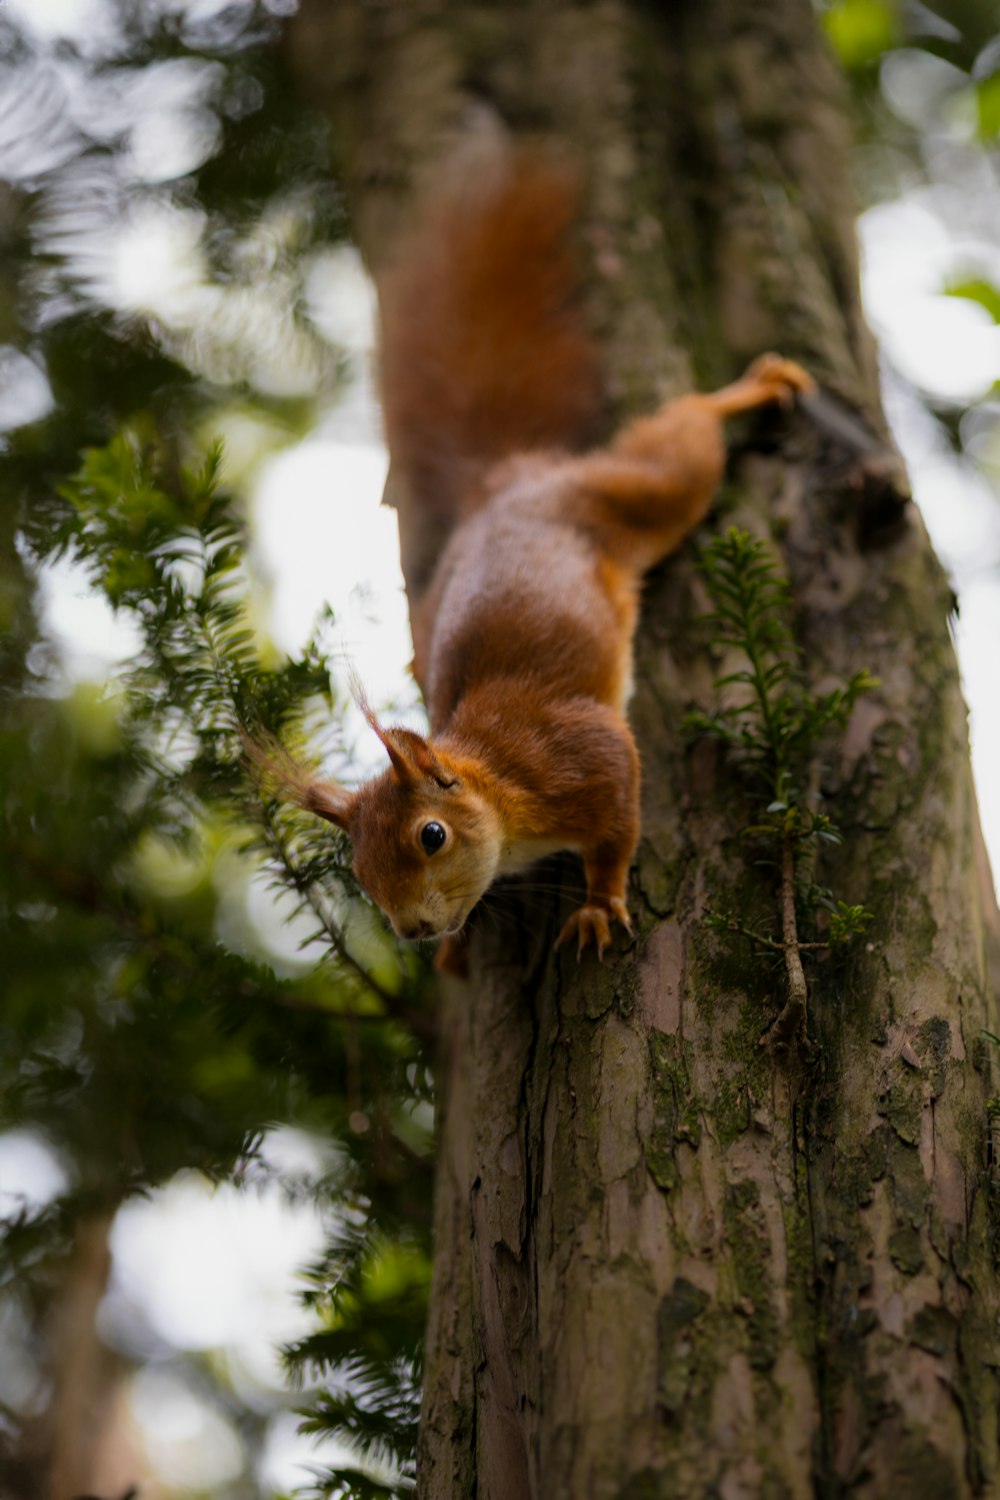 a red squirrel climbing up a tree trunk